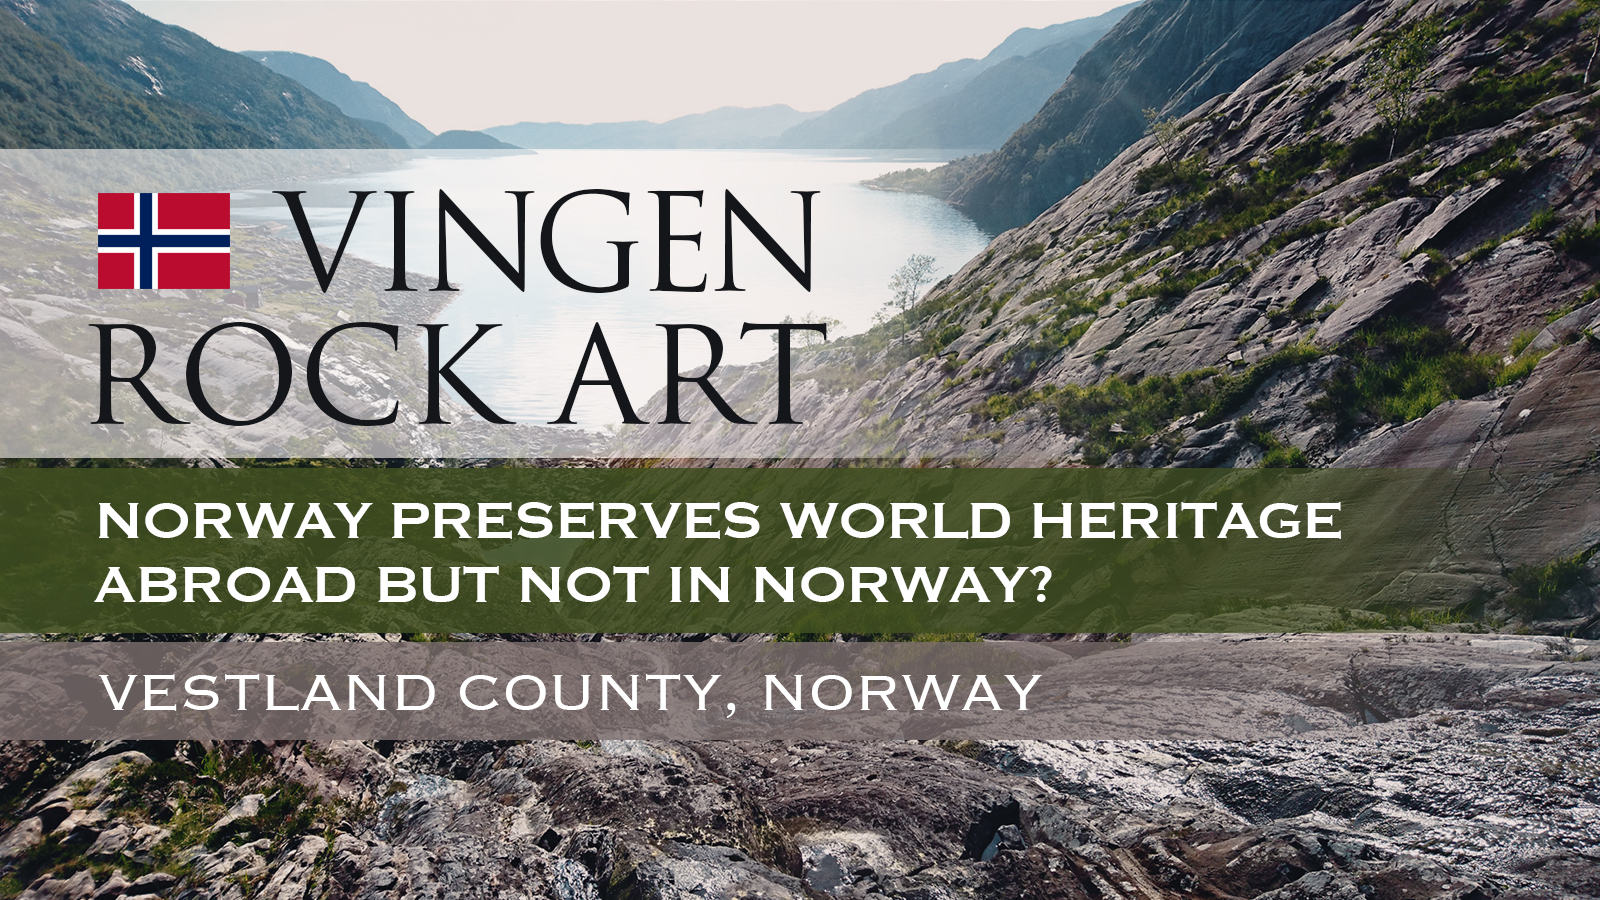 Norway preserves world heritage abroad but not in Norway?